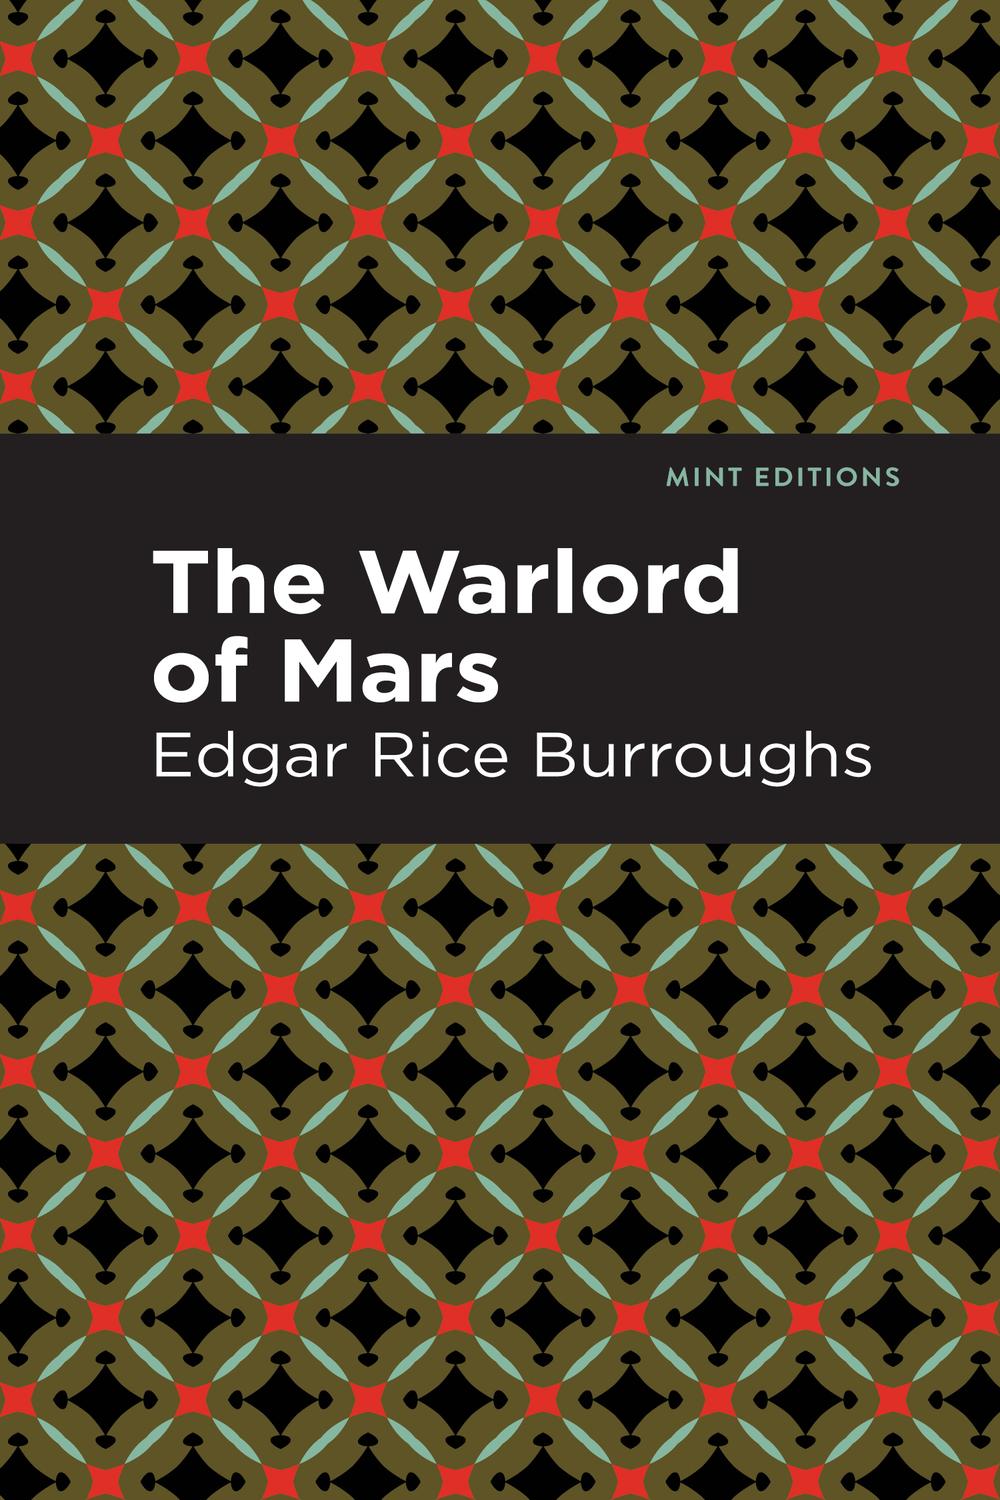 The Warlord of Mars - Edgar Rice Burroughs,,